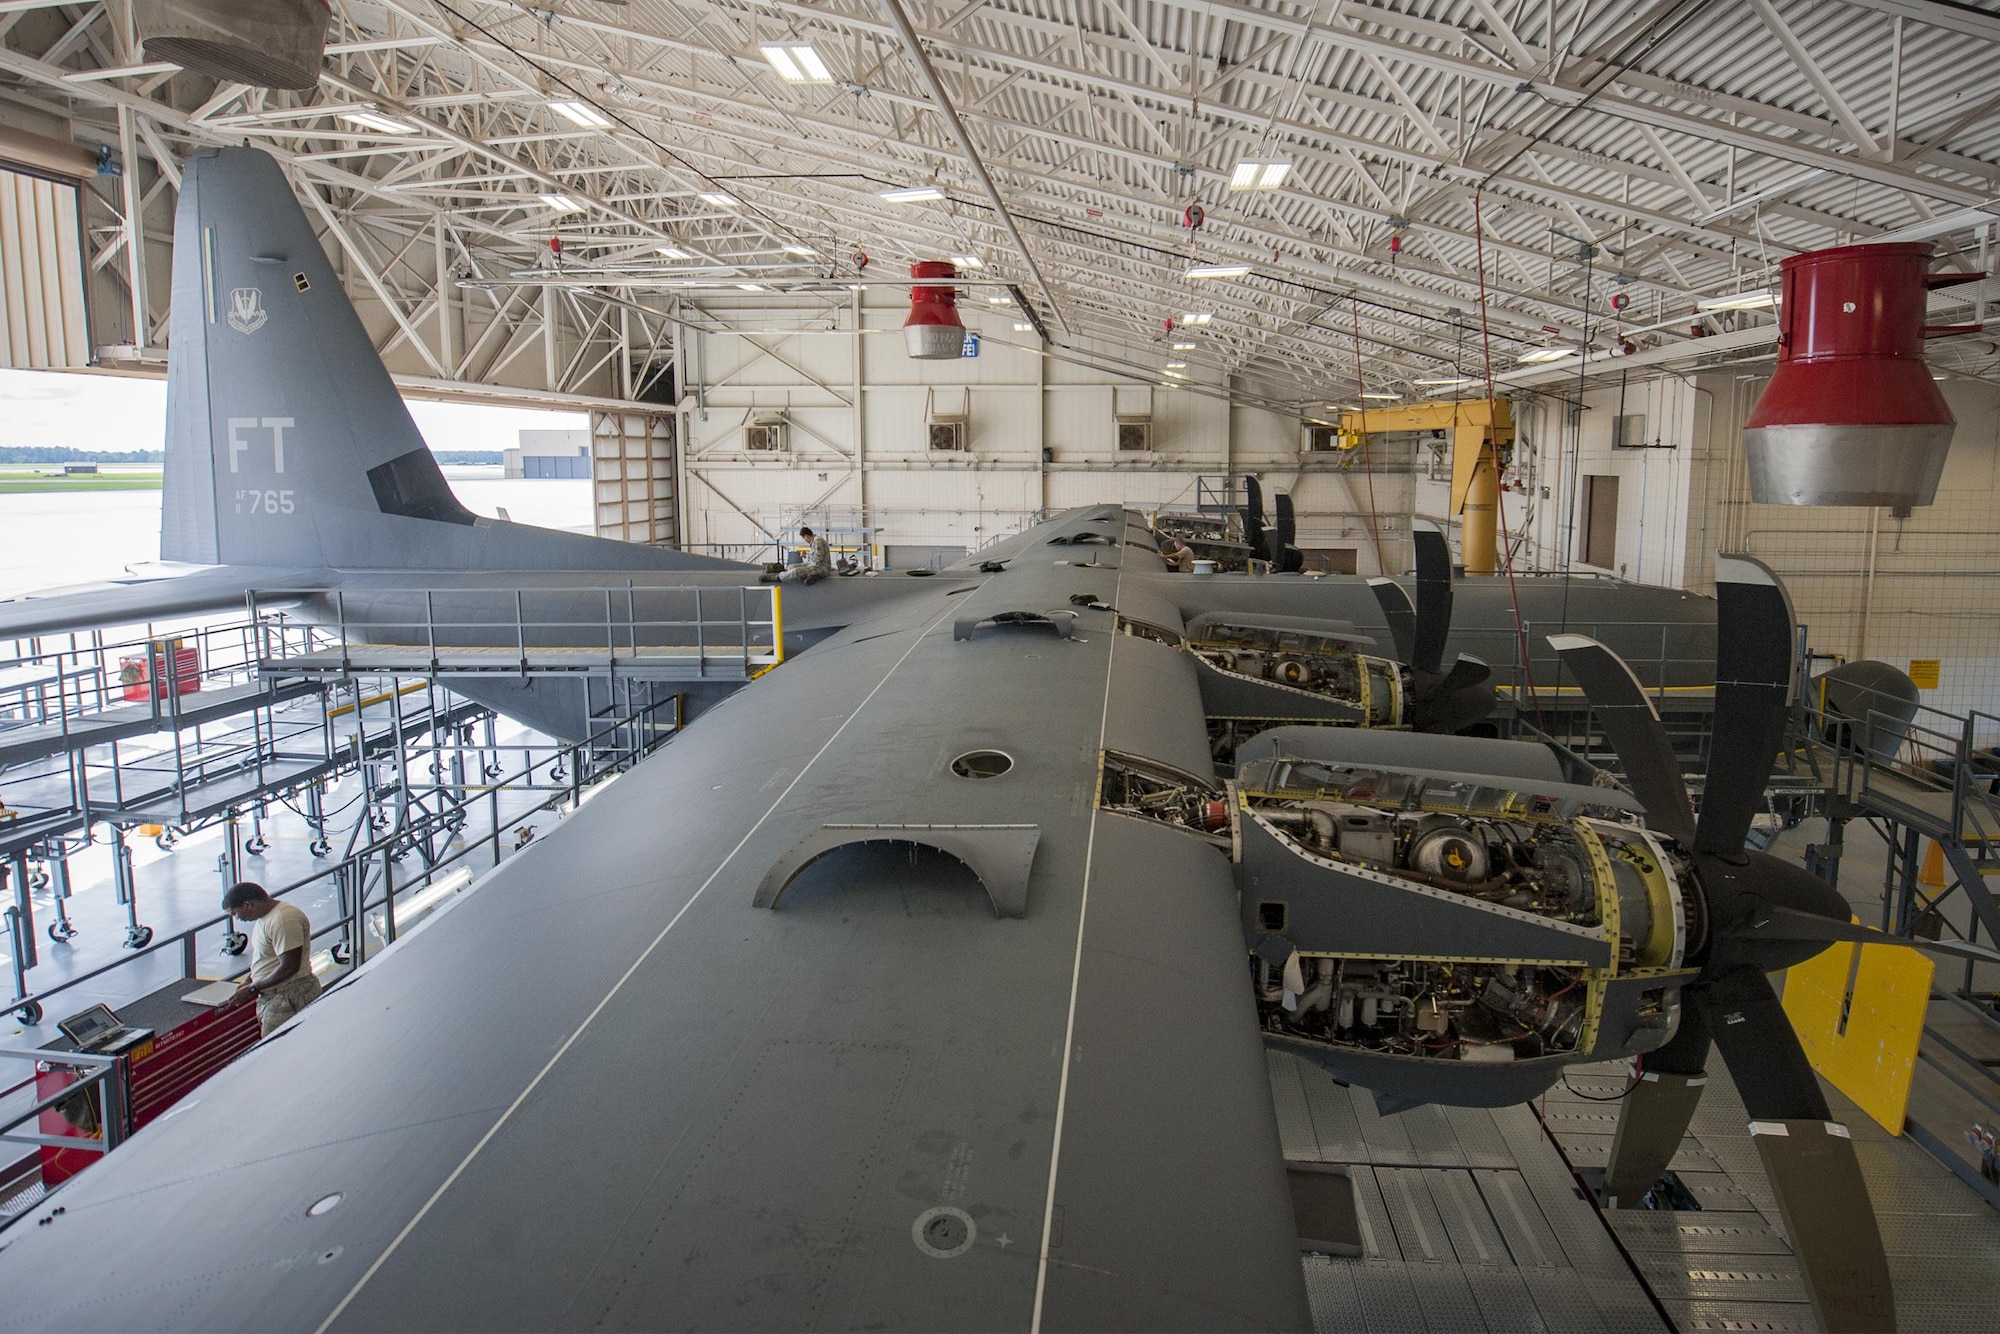 A dismantled HC-130J Combat King II undergoes a B-check isochronal inspection, Aug. 16, 2016, at Moody Air Force Base, Ga. B-check ISO inspections are performed after an HC-130J has been active for roughly 270 days. (U.S. Air Force photo by Airman 1st Class Daniel Snider/Released)
